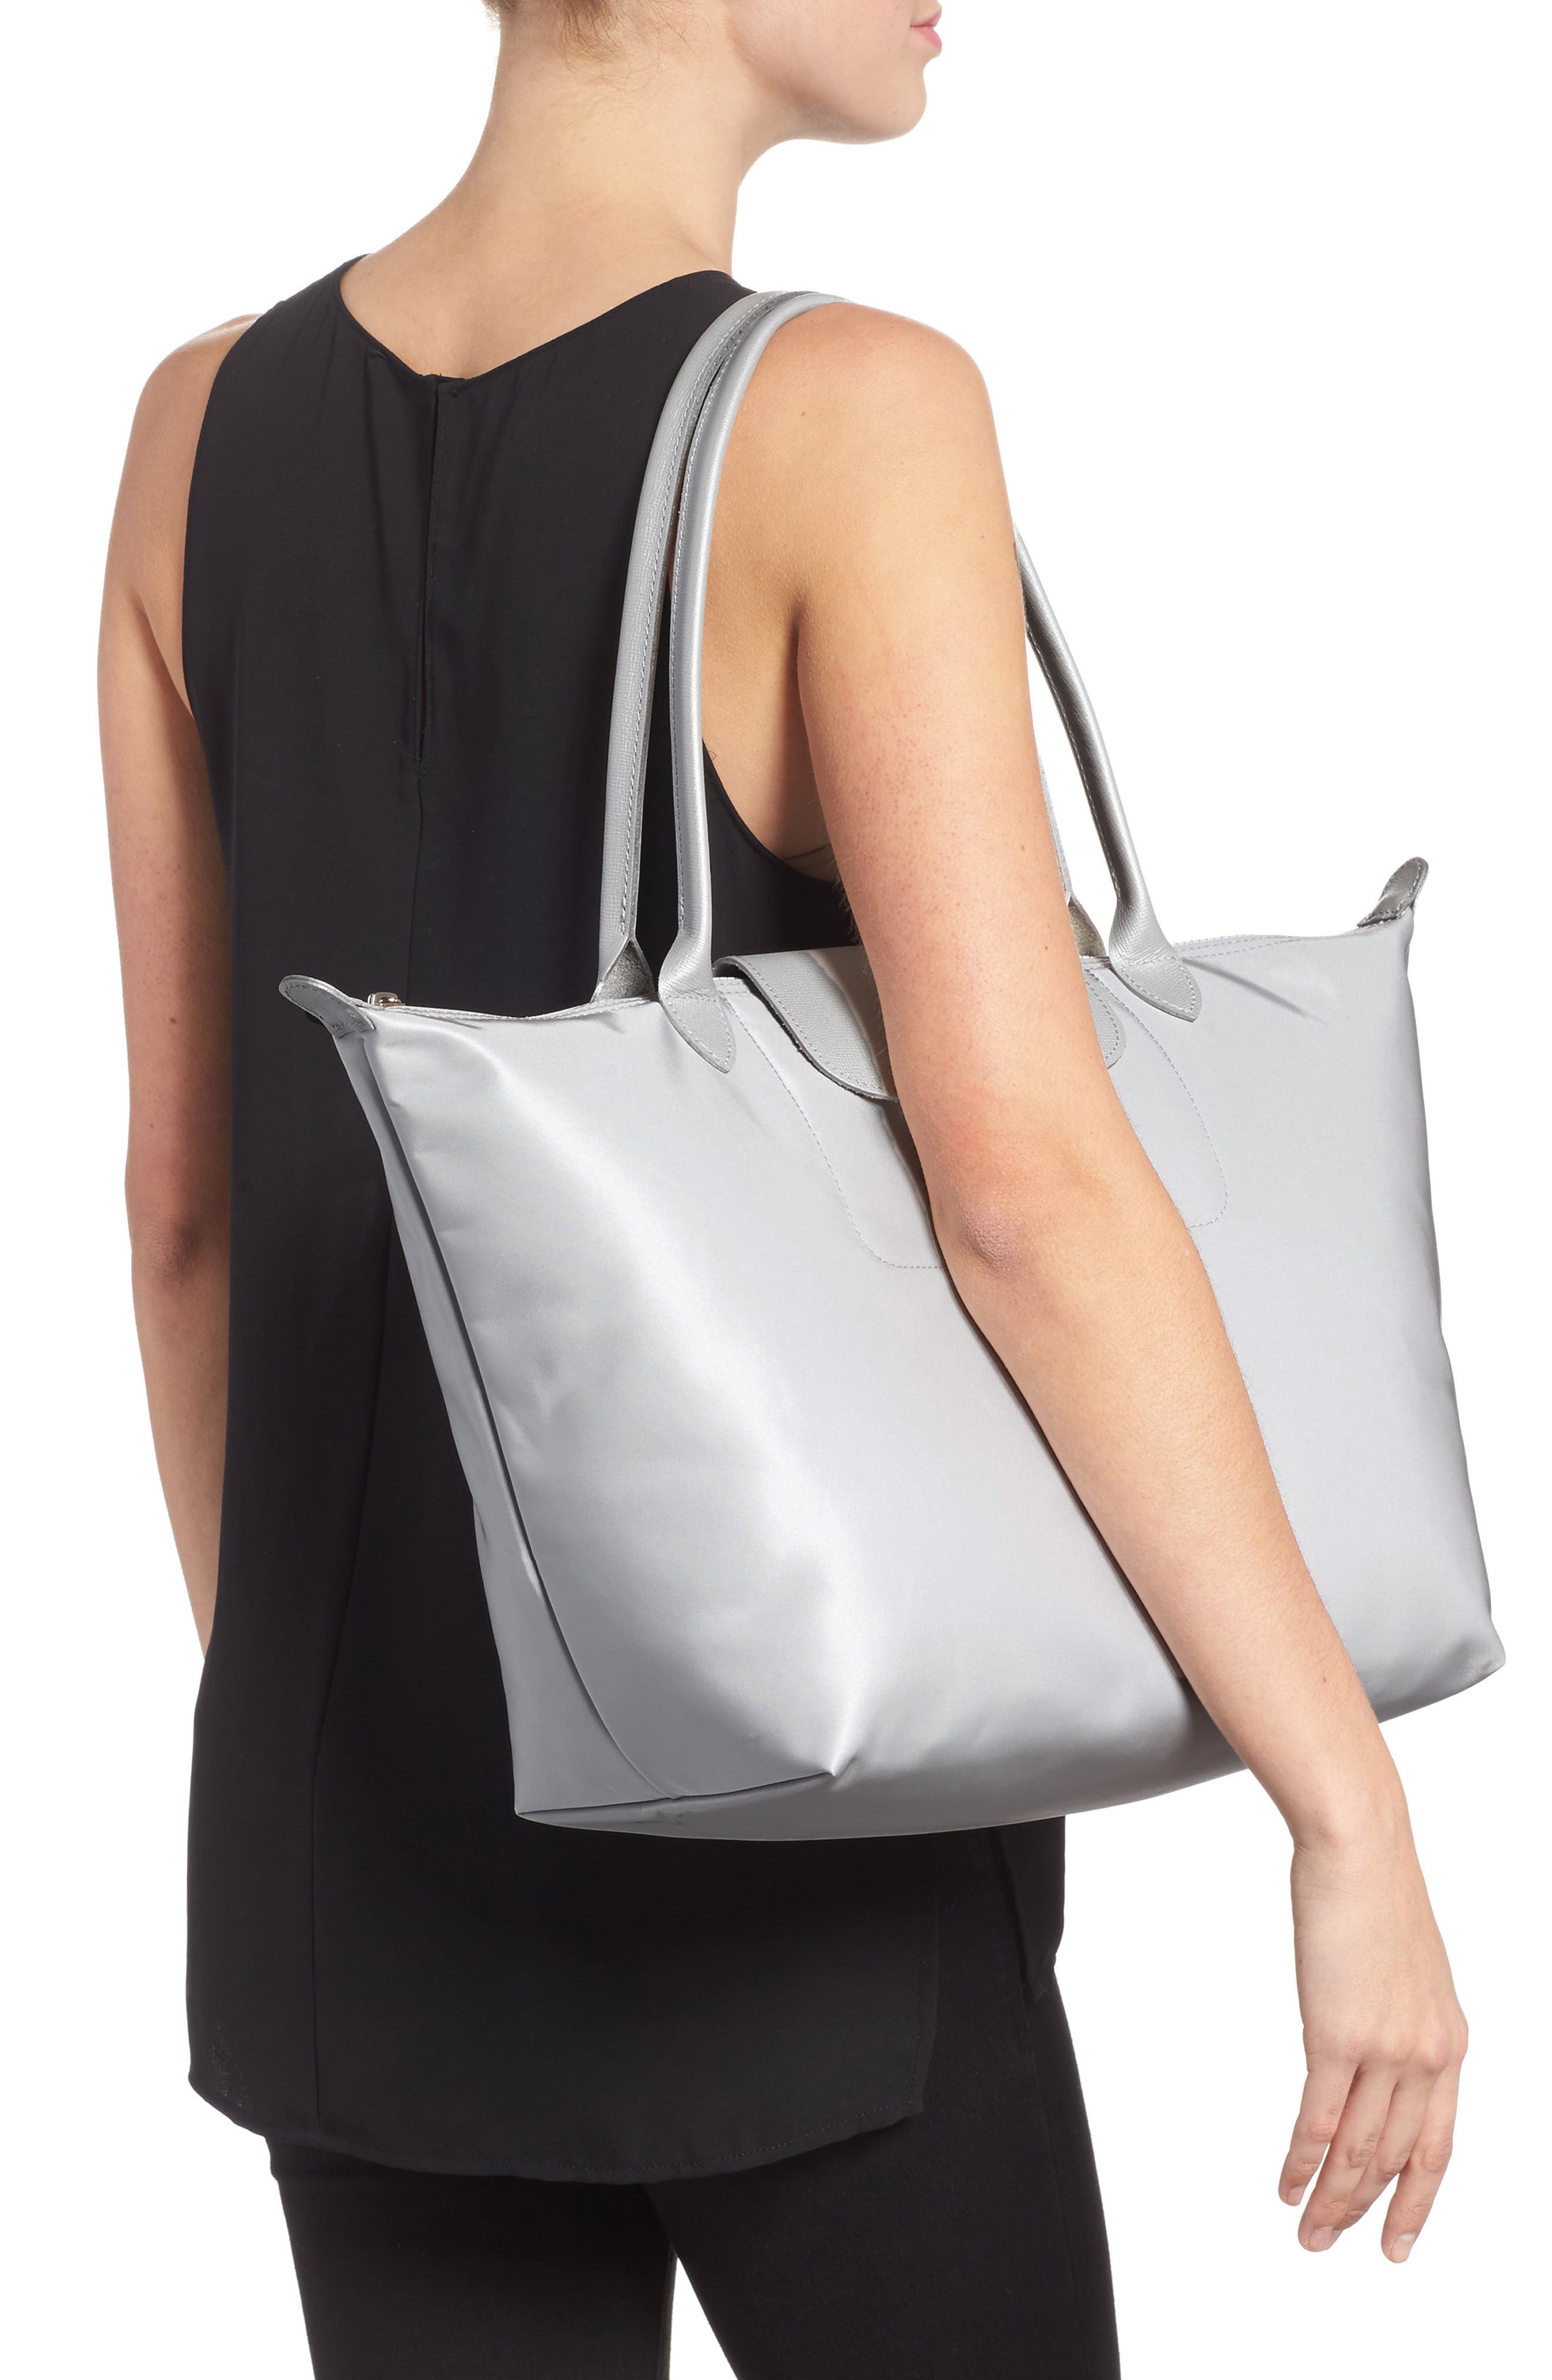 Object of Desire: Longchamp Le Pliage Nylon Tote Bag - Forbes Vetted